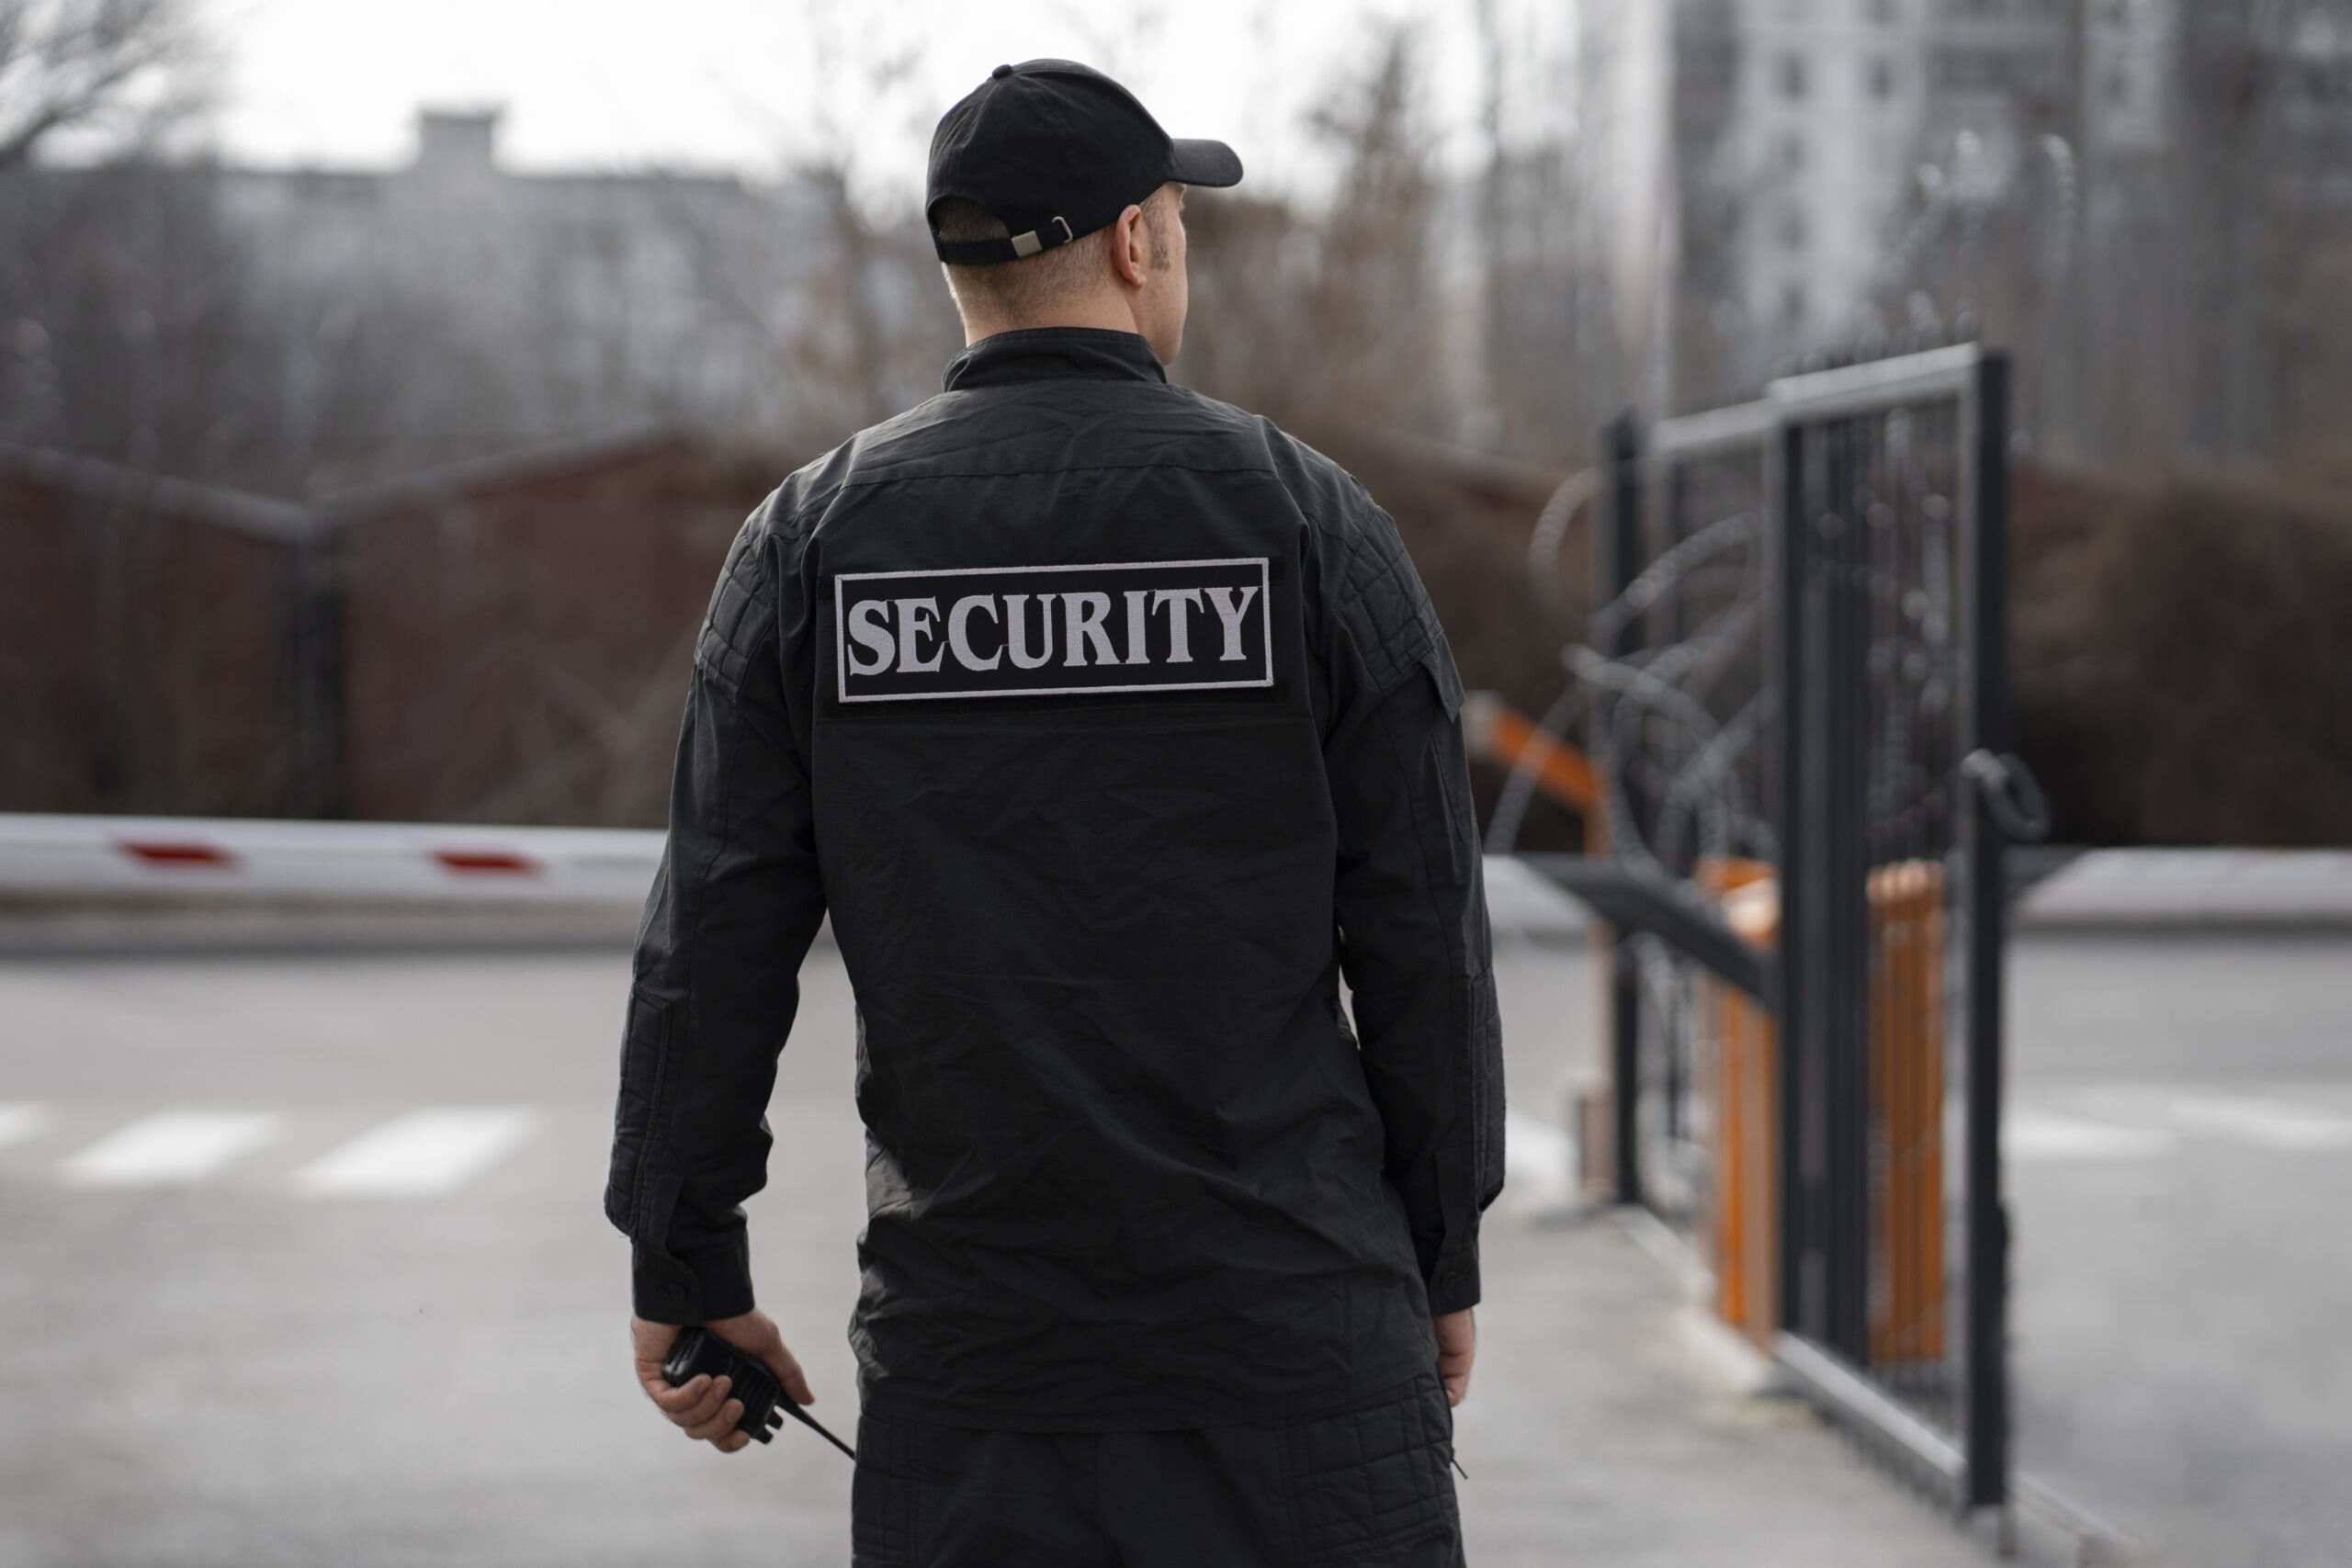 Manpower in security